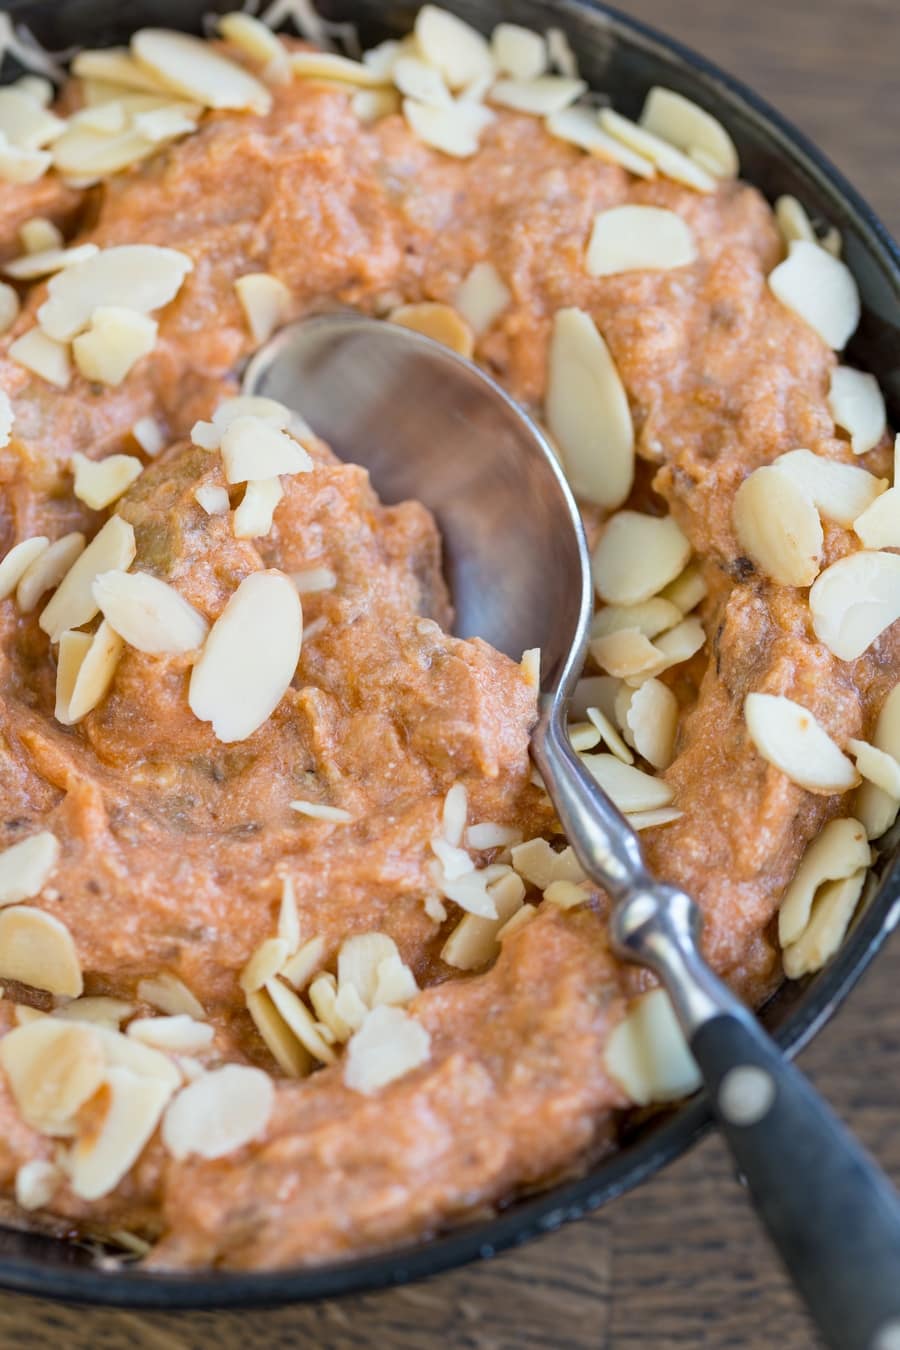 Eggplant ricotta dip garnished with roasted shaved almonds.